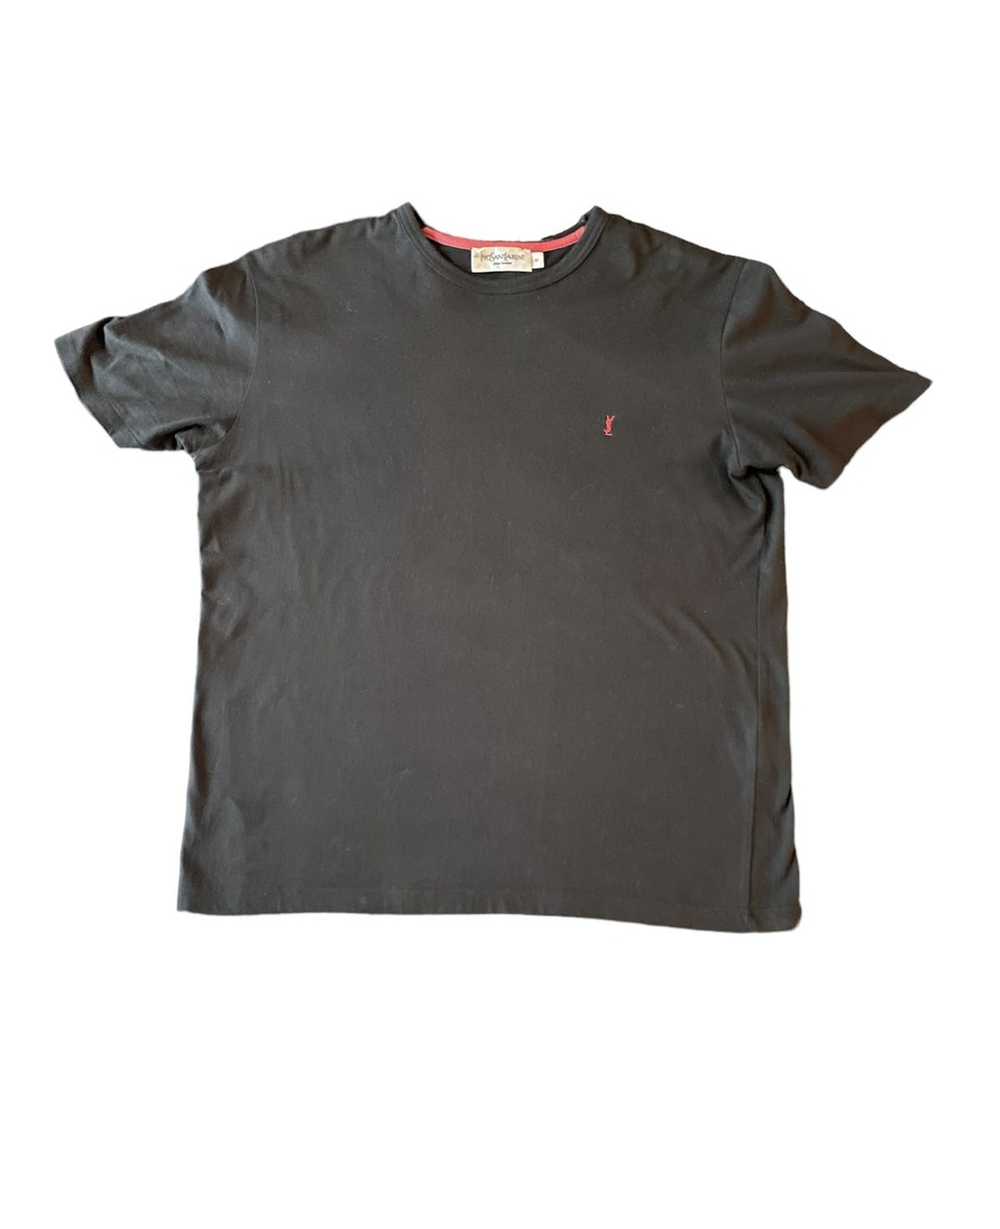 Ysl Pour Homme YSL Red Logo Tee - image 1